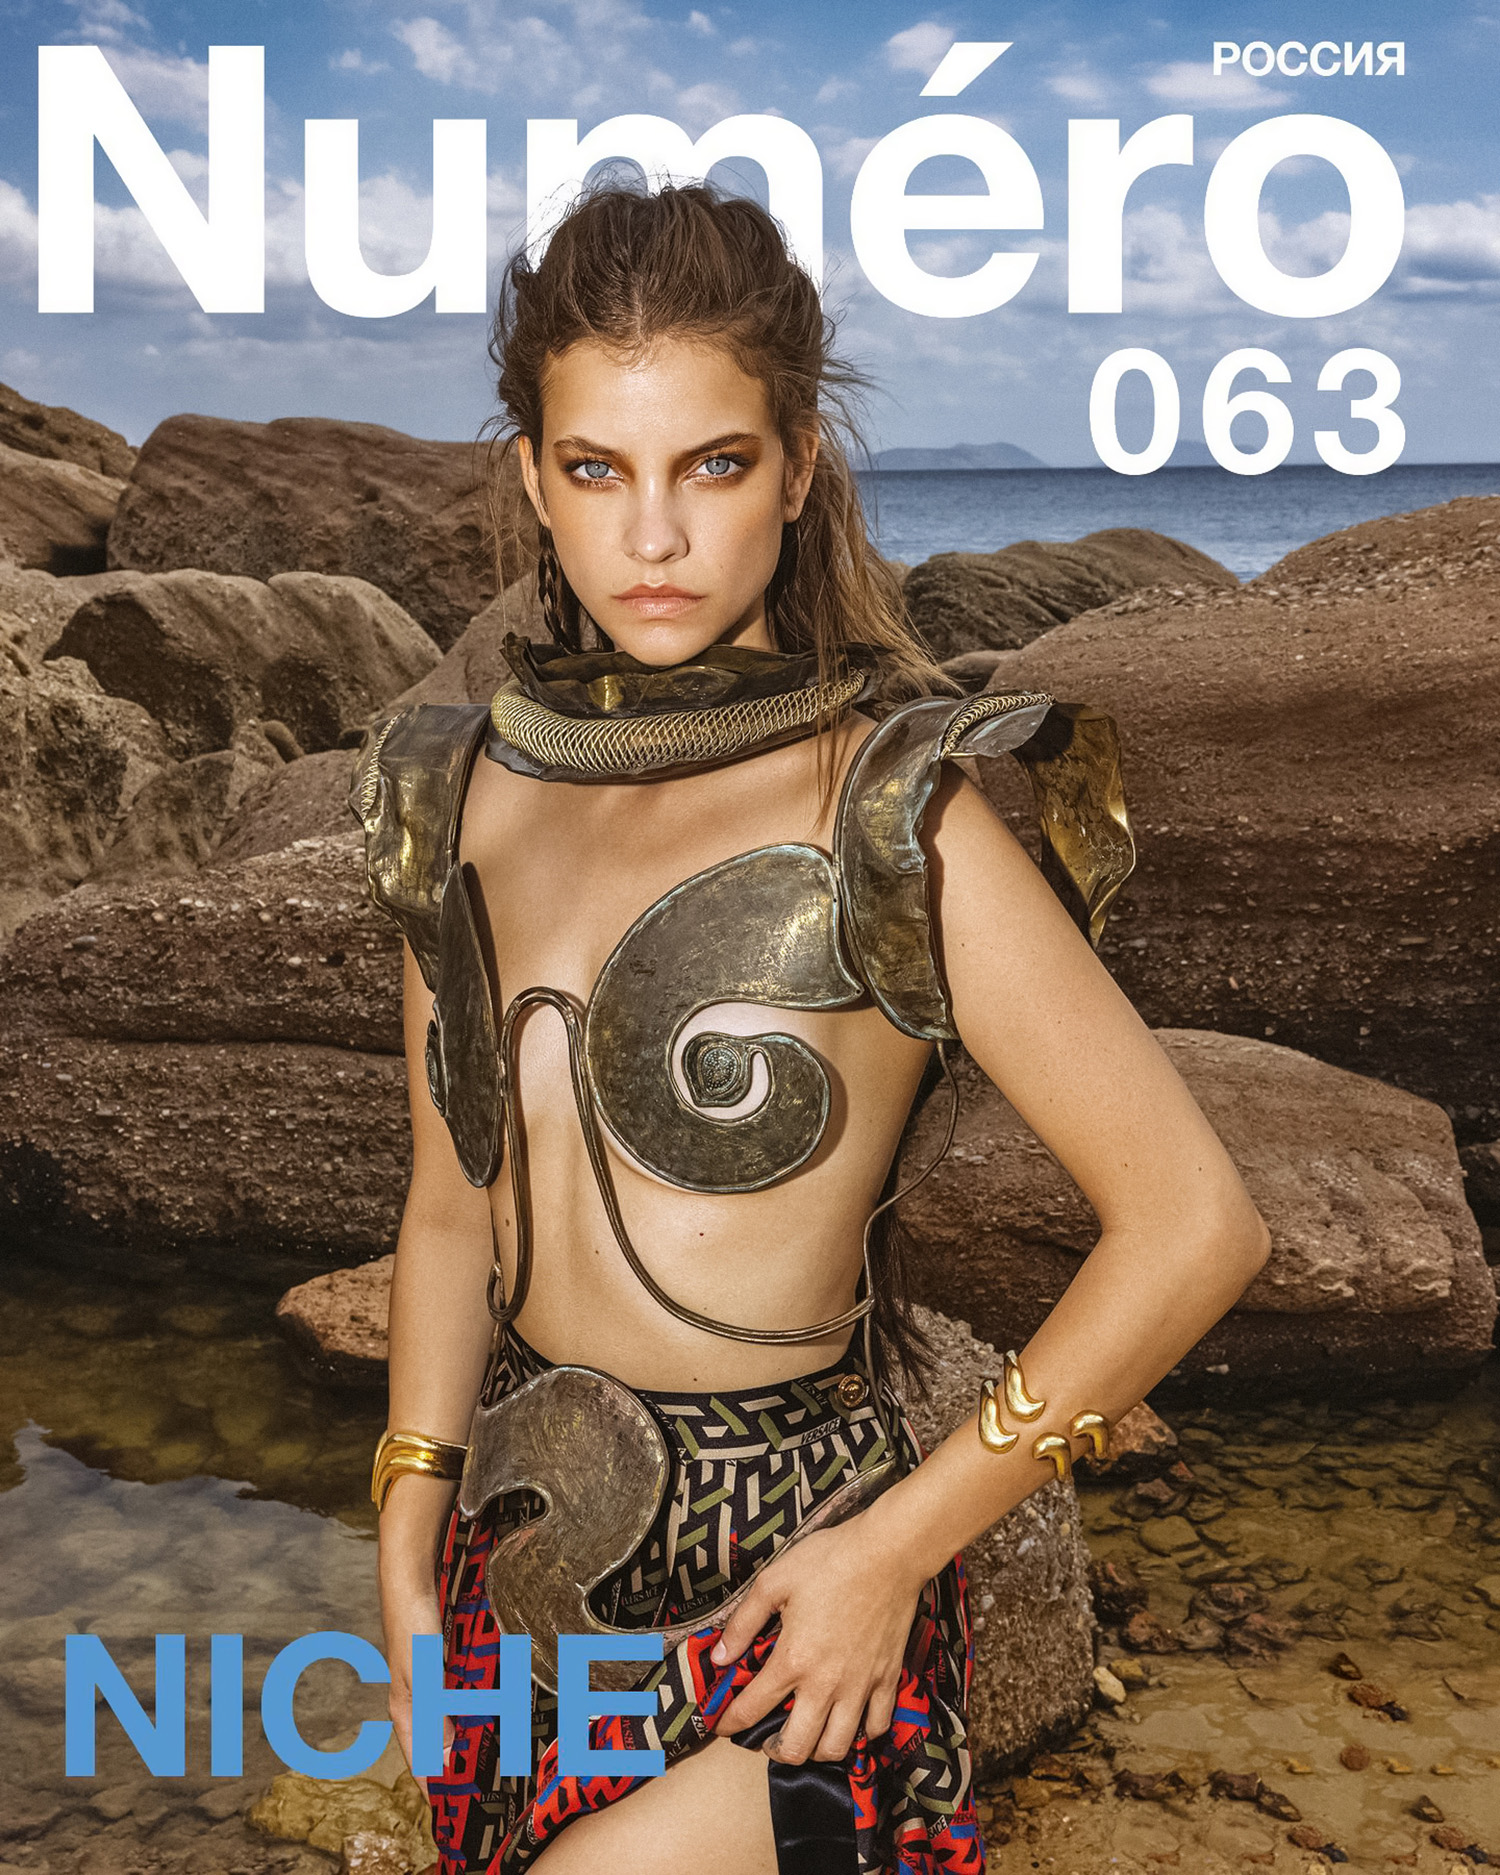 Barbara Palvin covers Numéro Russia Issue 063 by George Livieratos